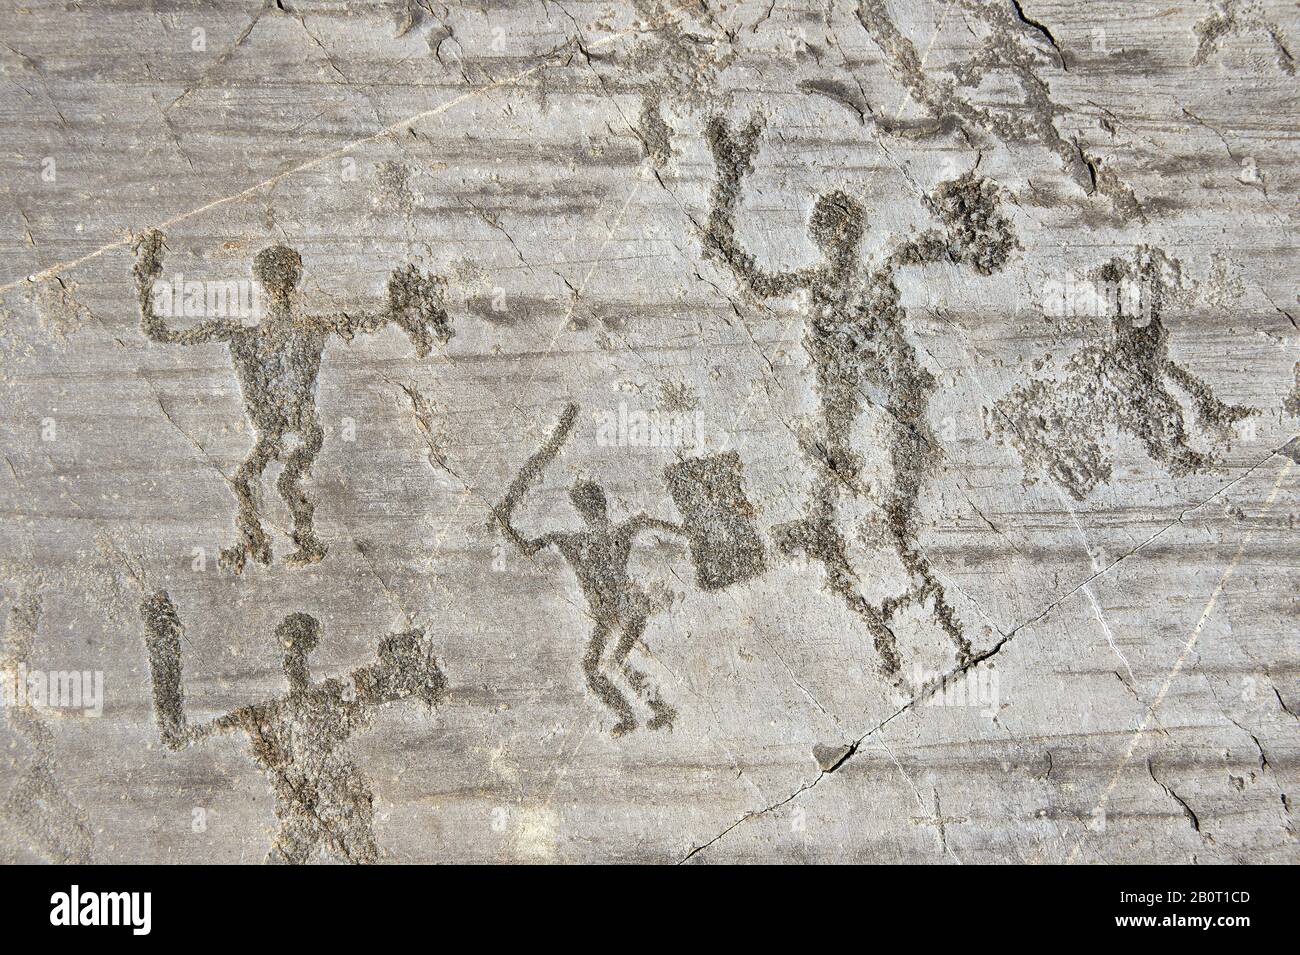 Petroglyph, rock carving, of warriors with swords and shileds. Carved by the ancient Camuni people in the iron age between 1000-1600 BC. Rock no 24, Stock Photo